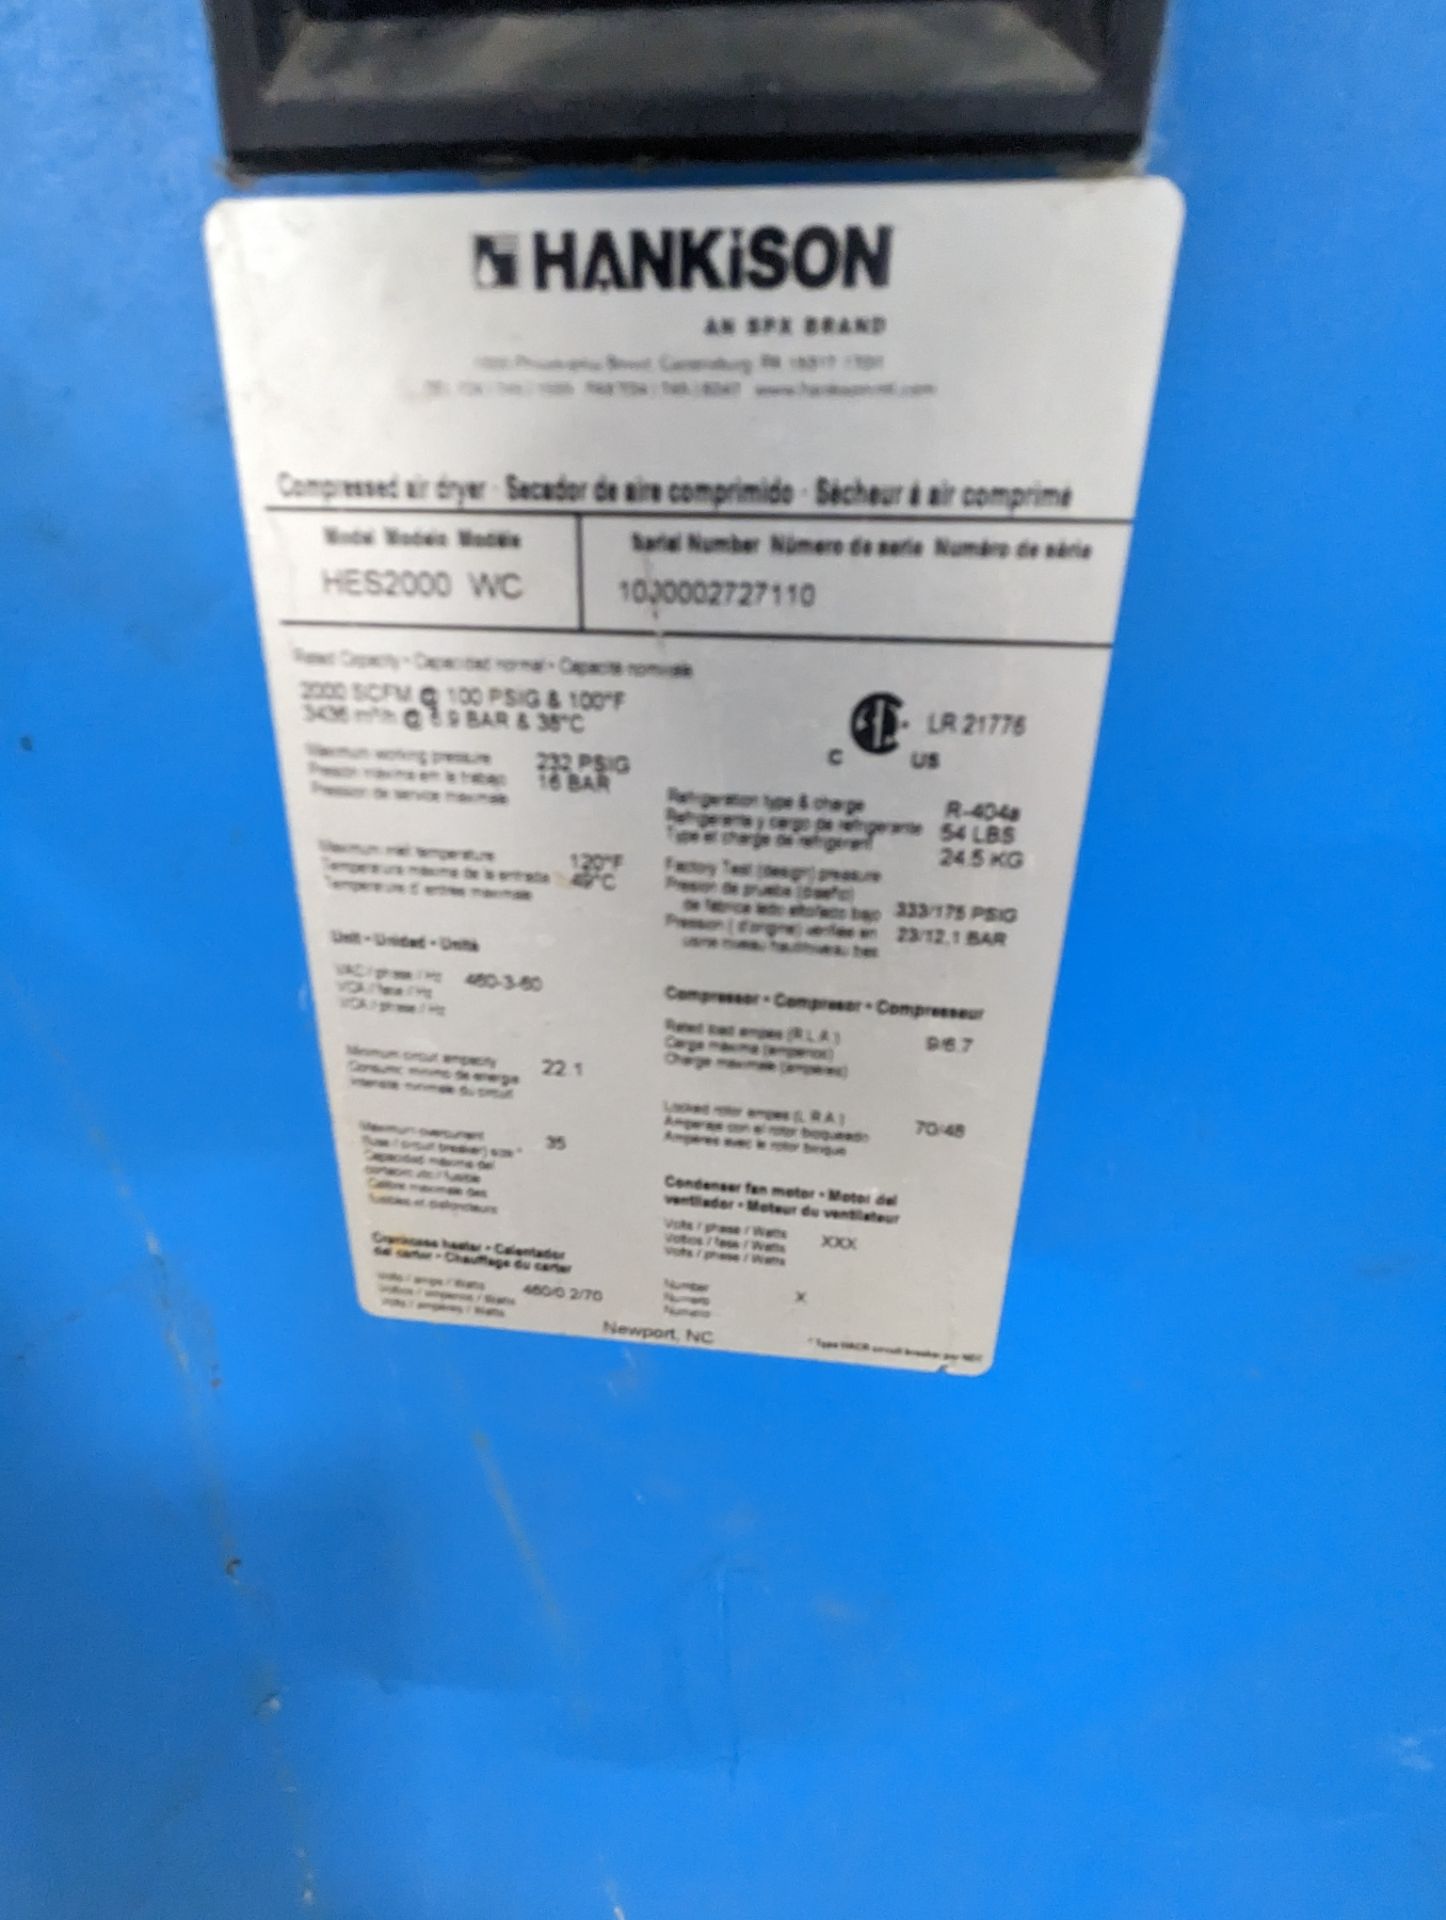 HANKINSON ENERGY SAVING REFRIGERATED COMPRESSED AIR DRYER MODEL # HES2000 WC SERIAL # 1000002727110 - Image 2 of 4